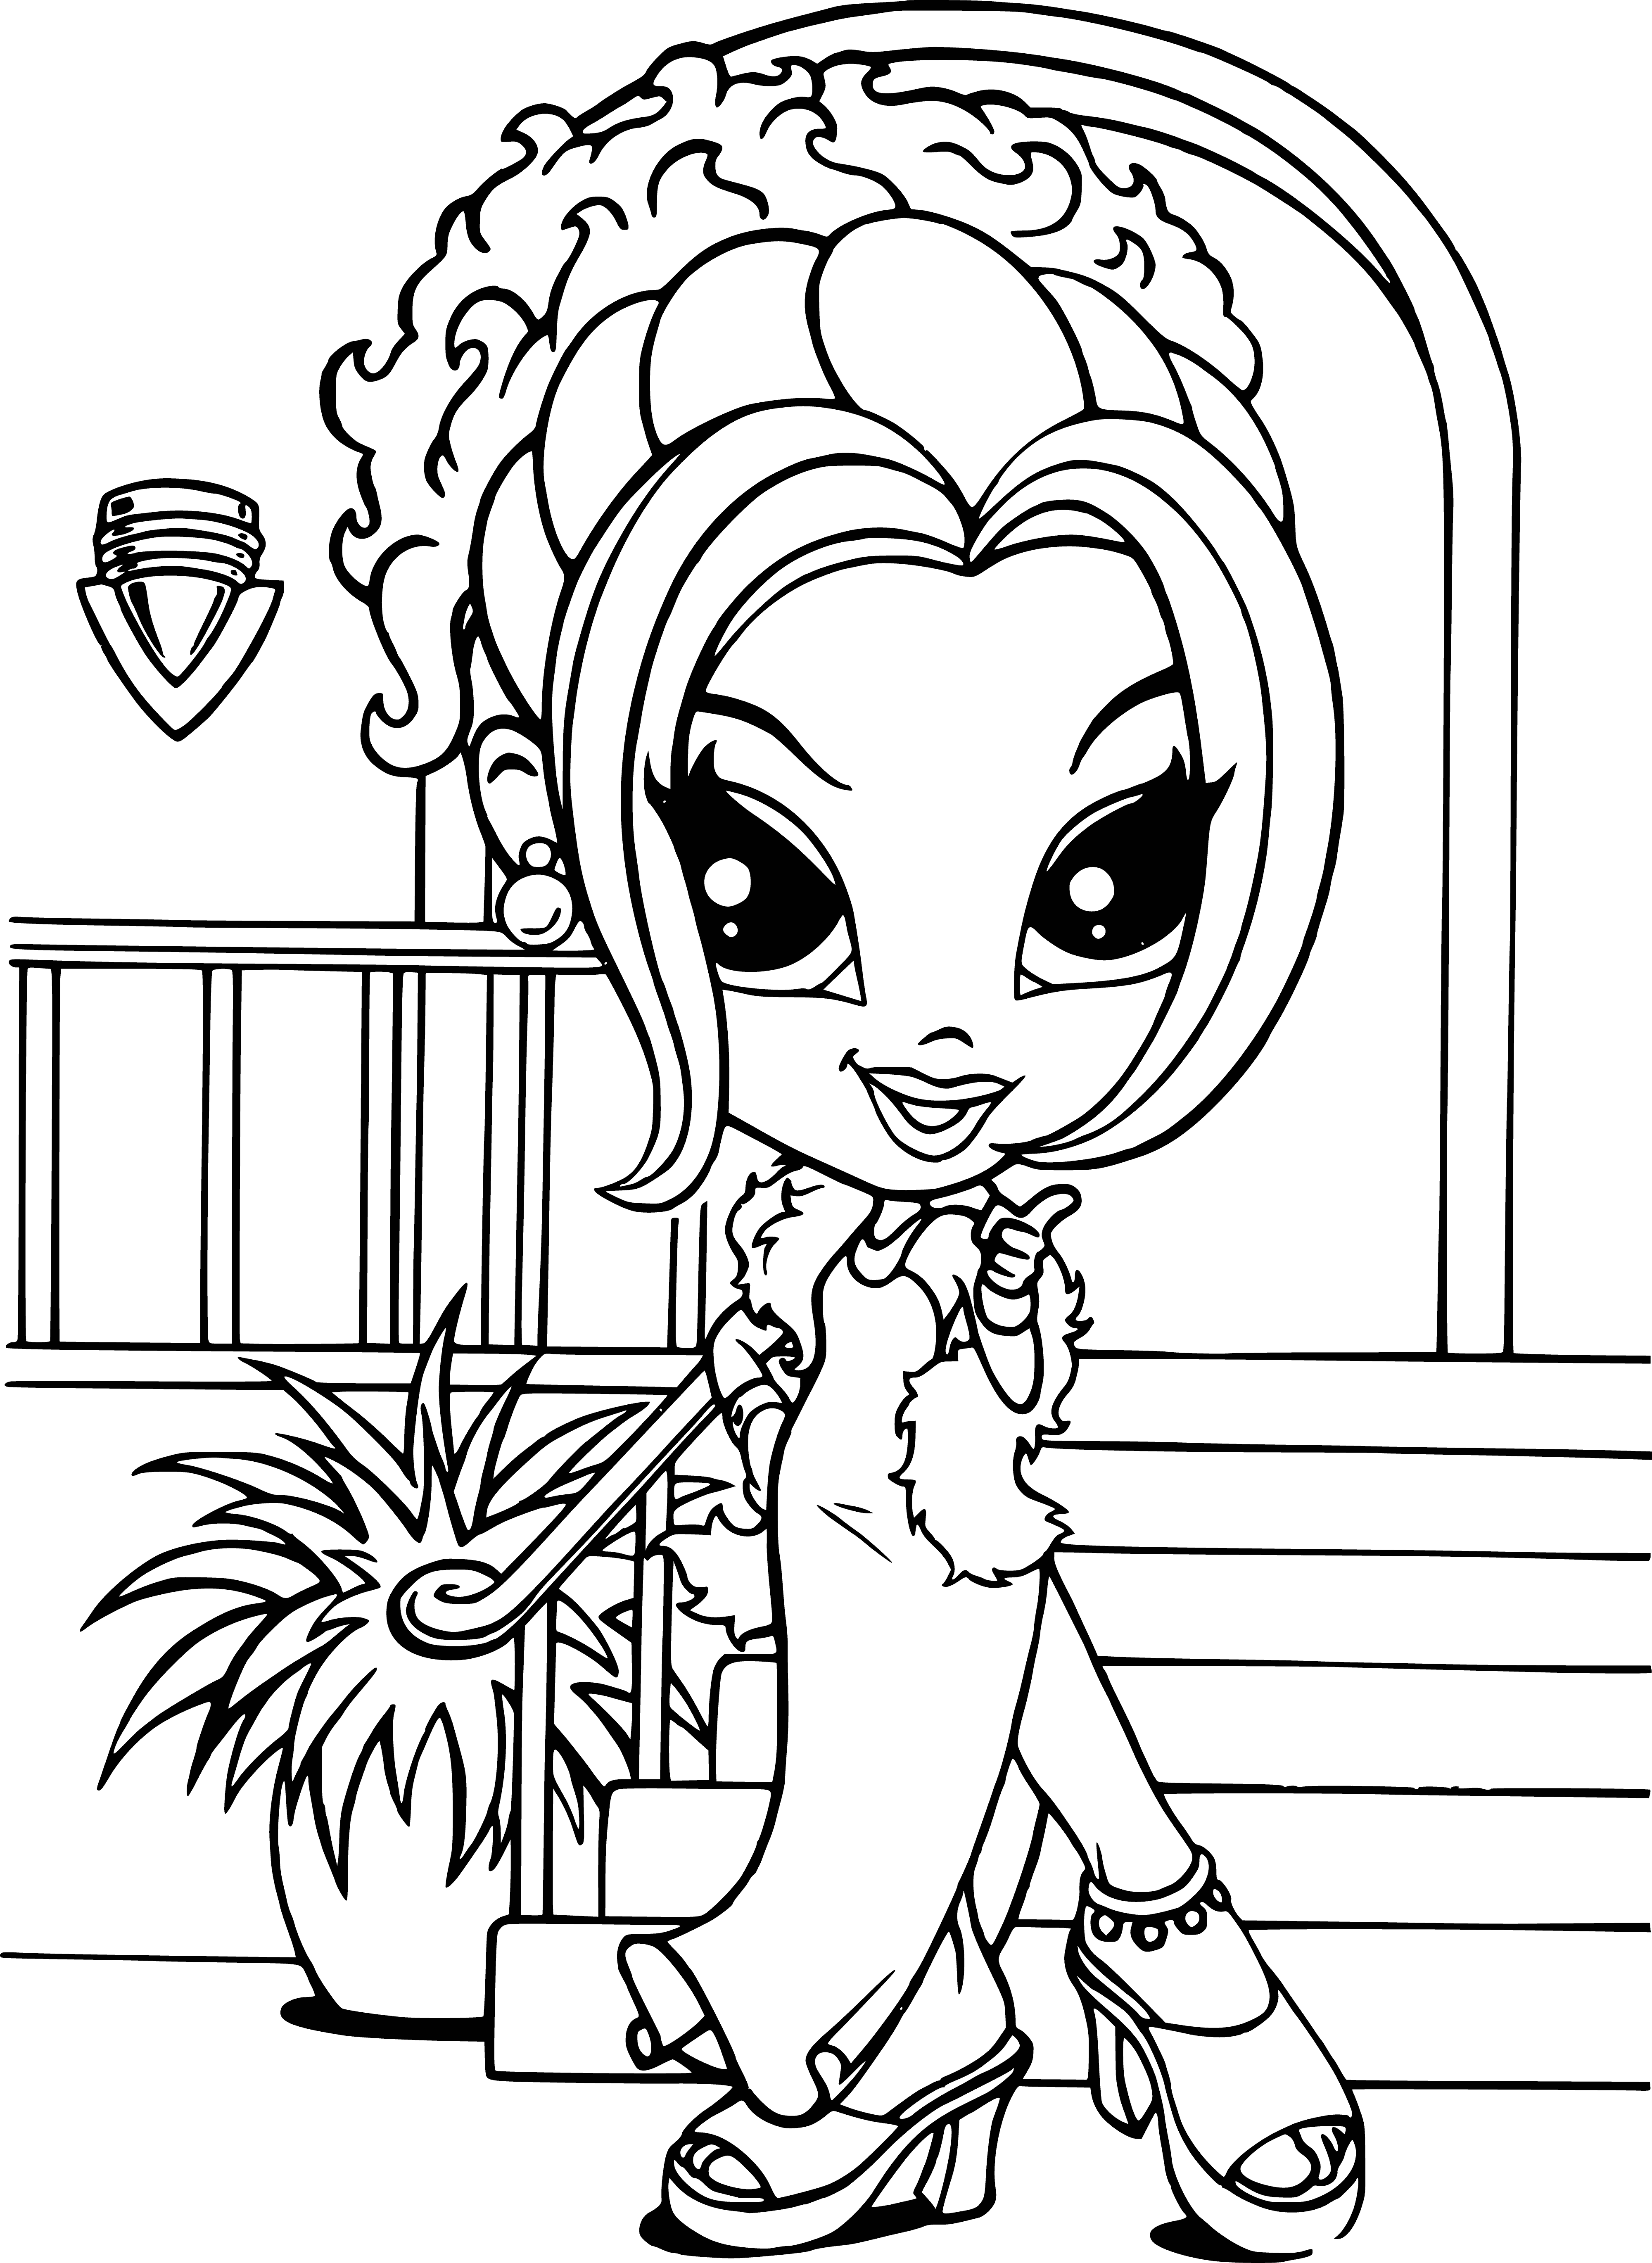 coloring page: --> Glam girl stands ready for fun night out w/ long, flowing hair & sparkly dress aglow on glittering background!